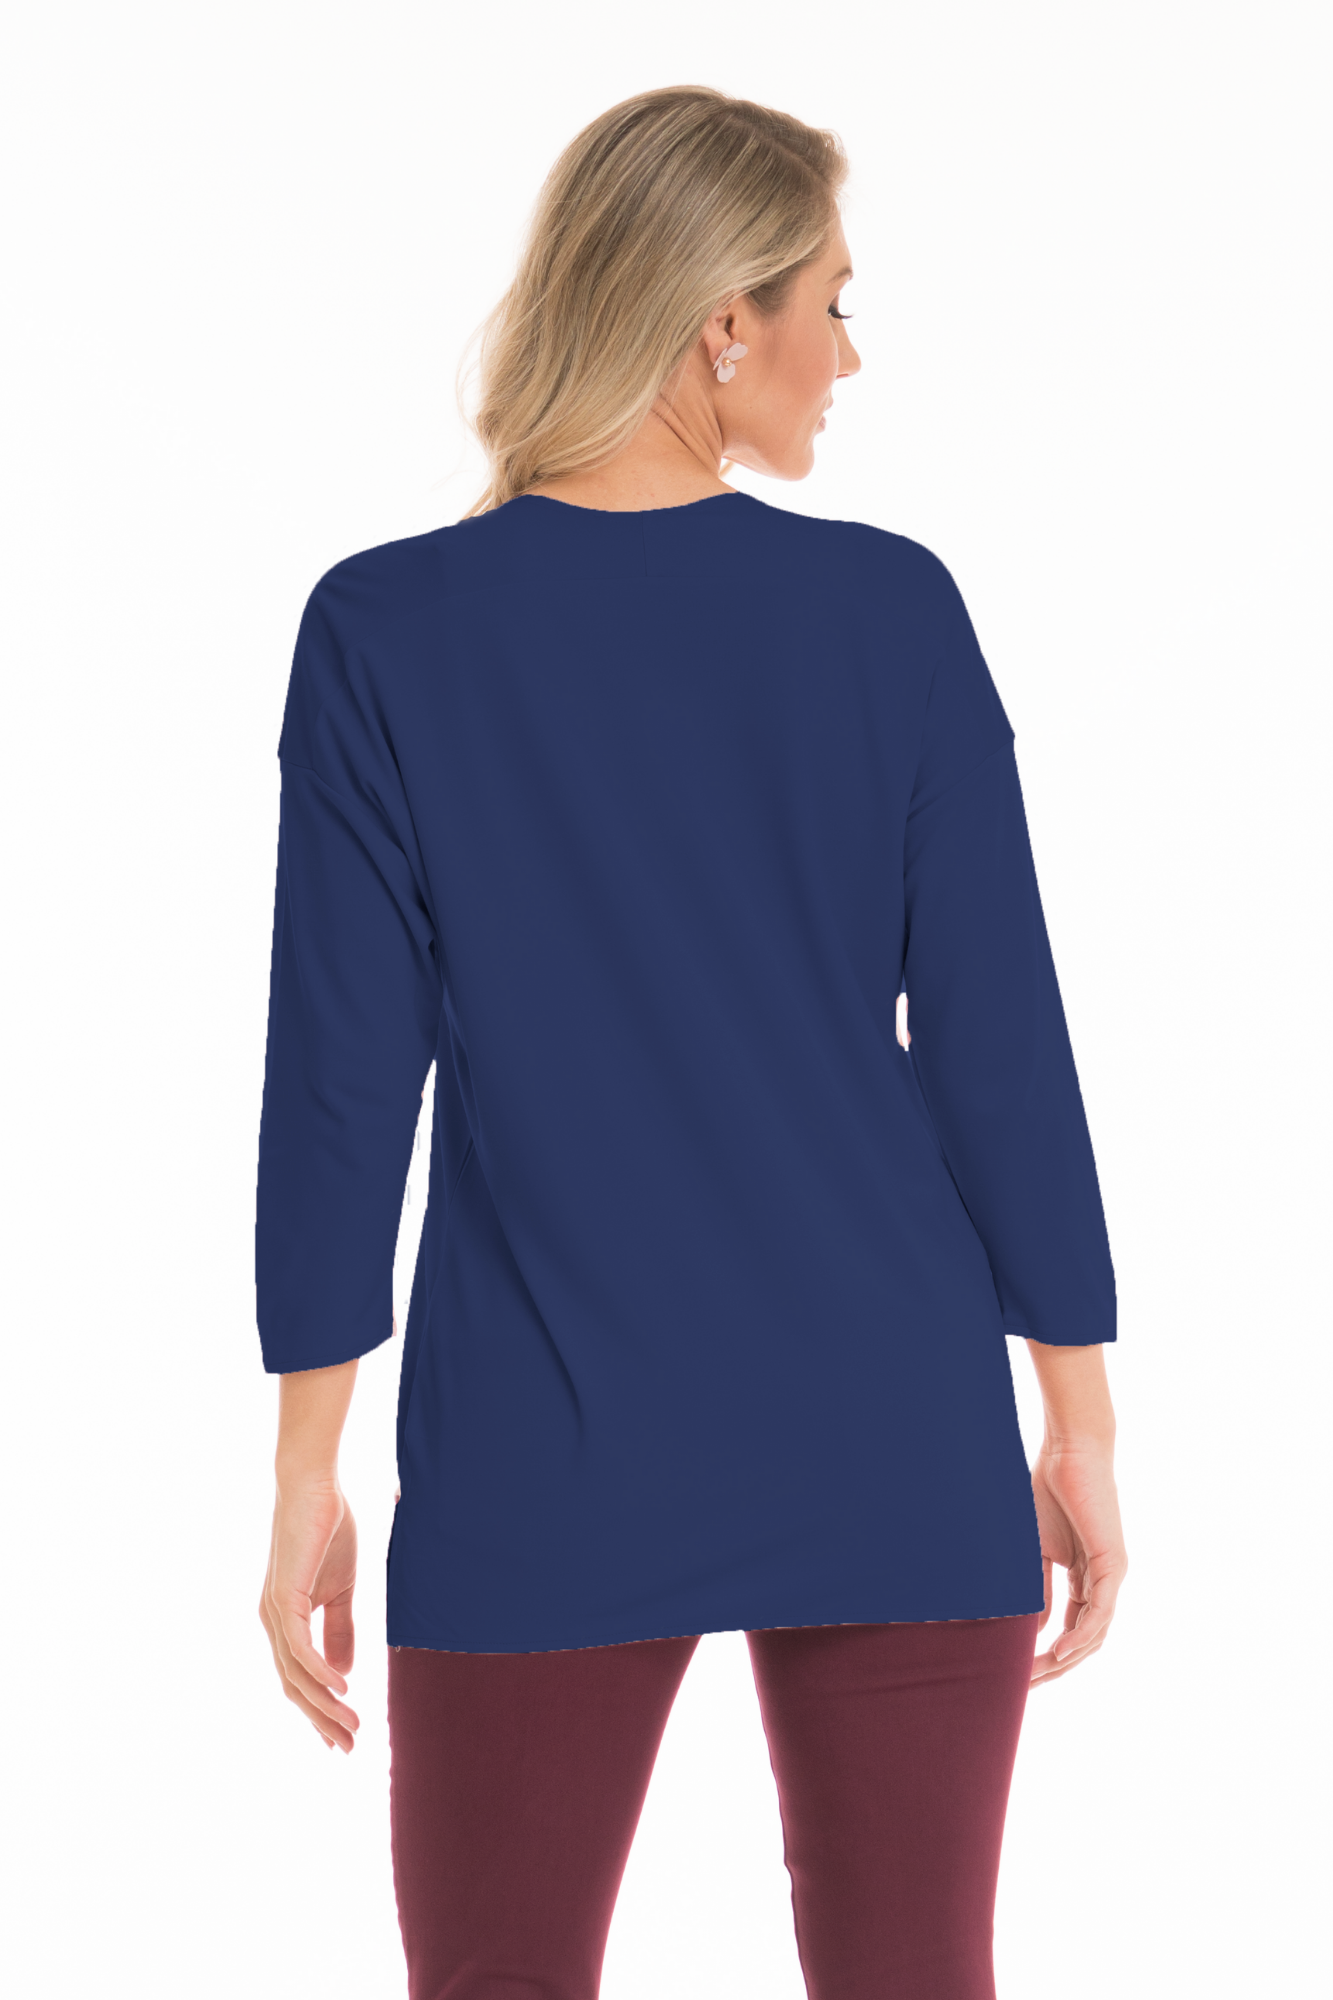 lior knit tops for women